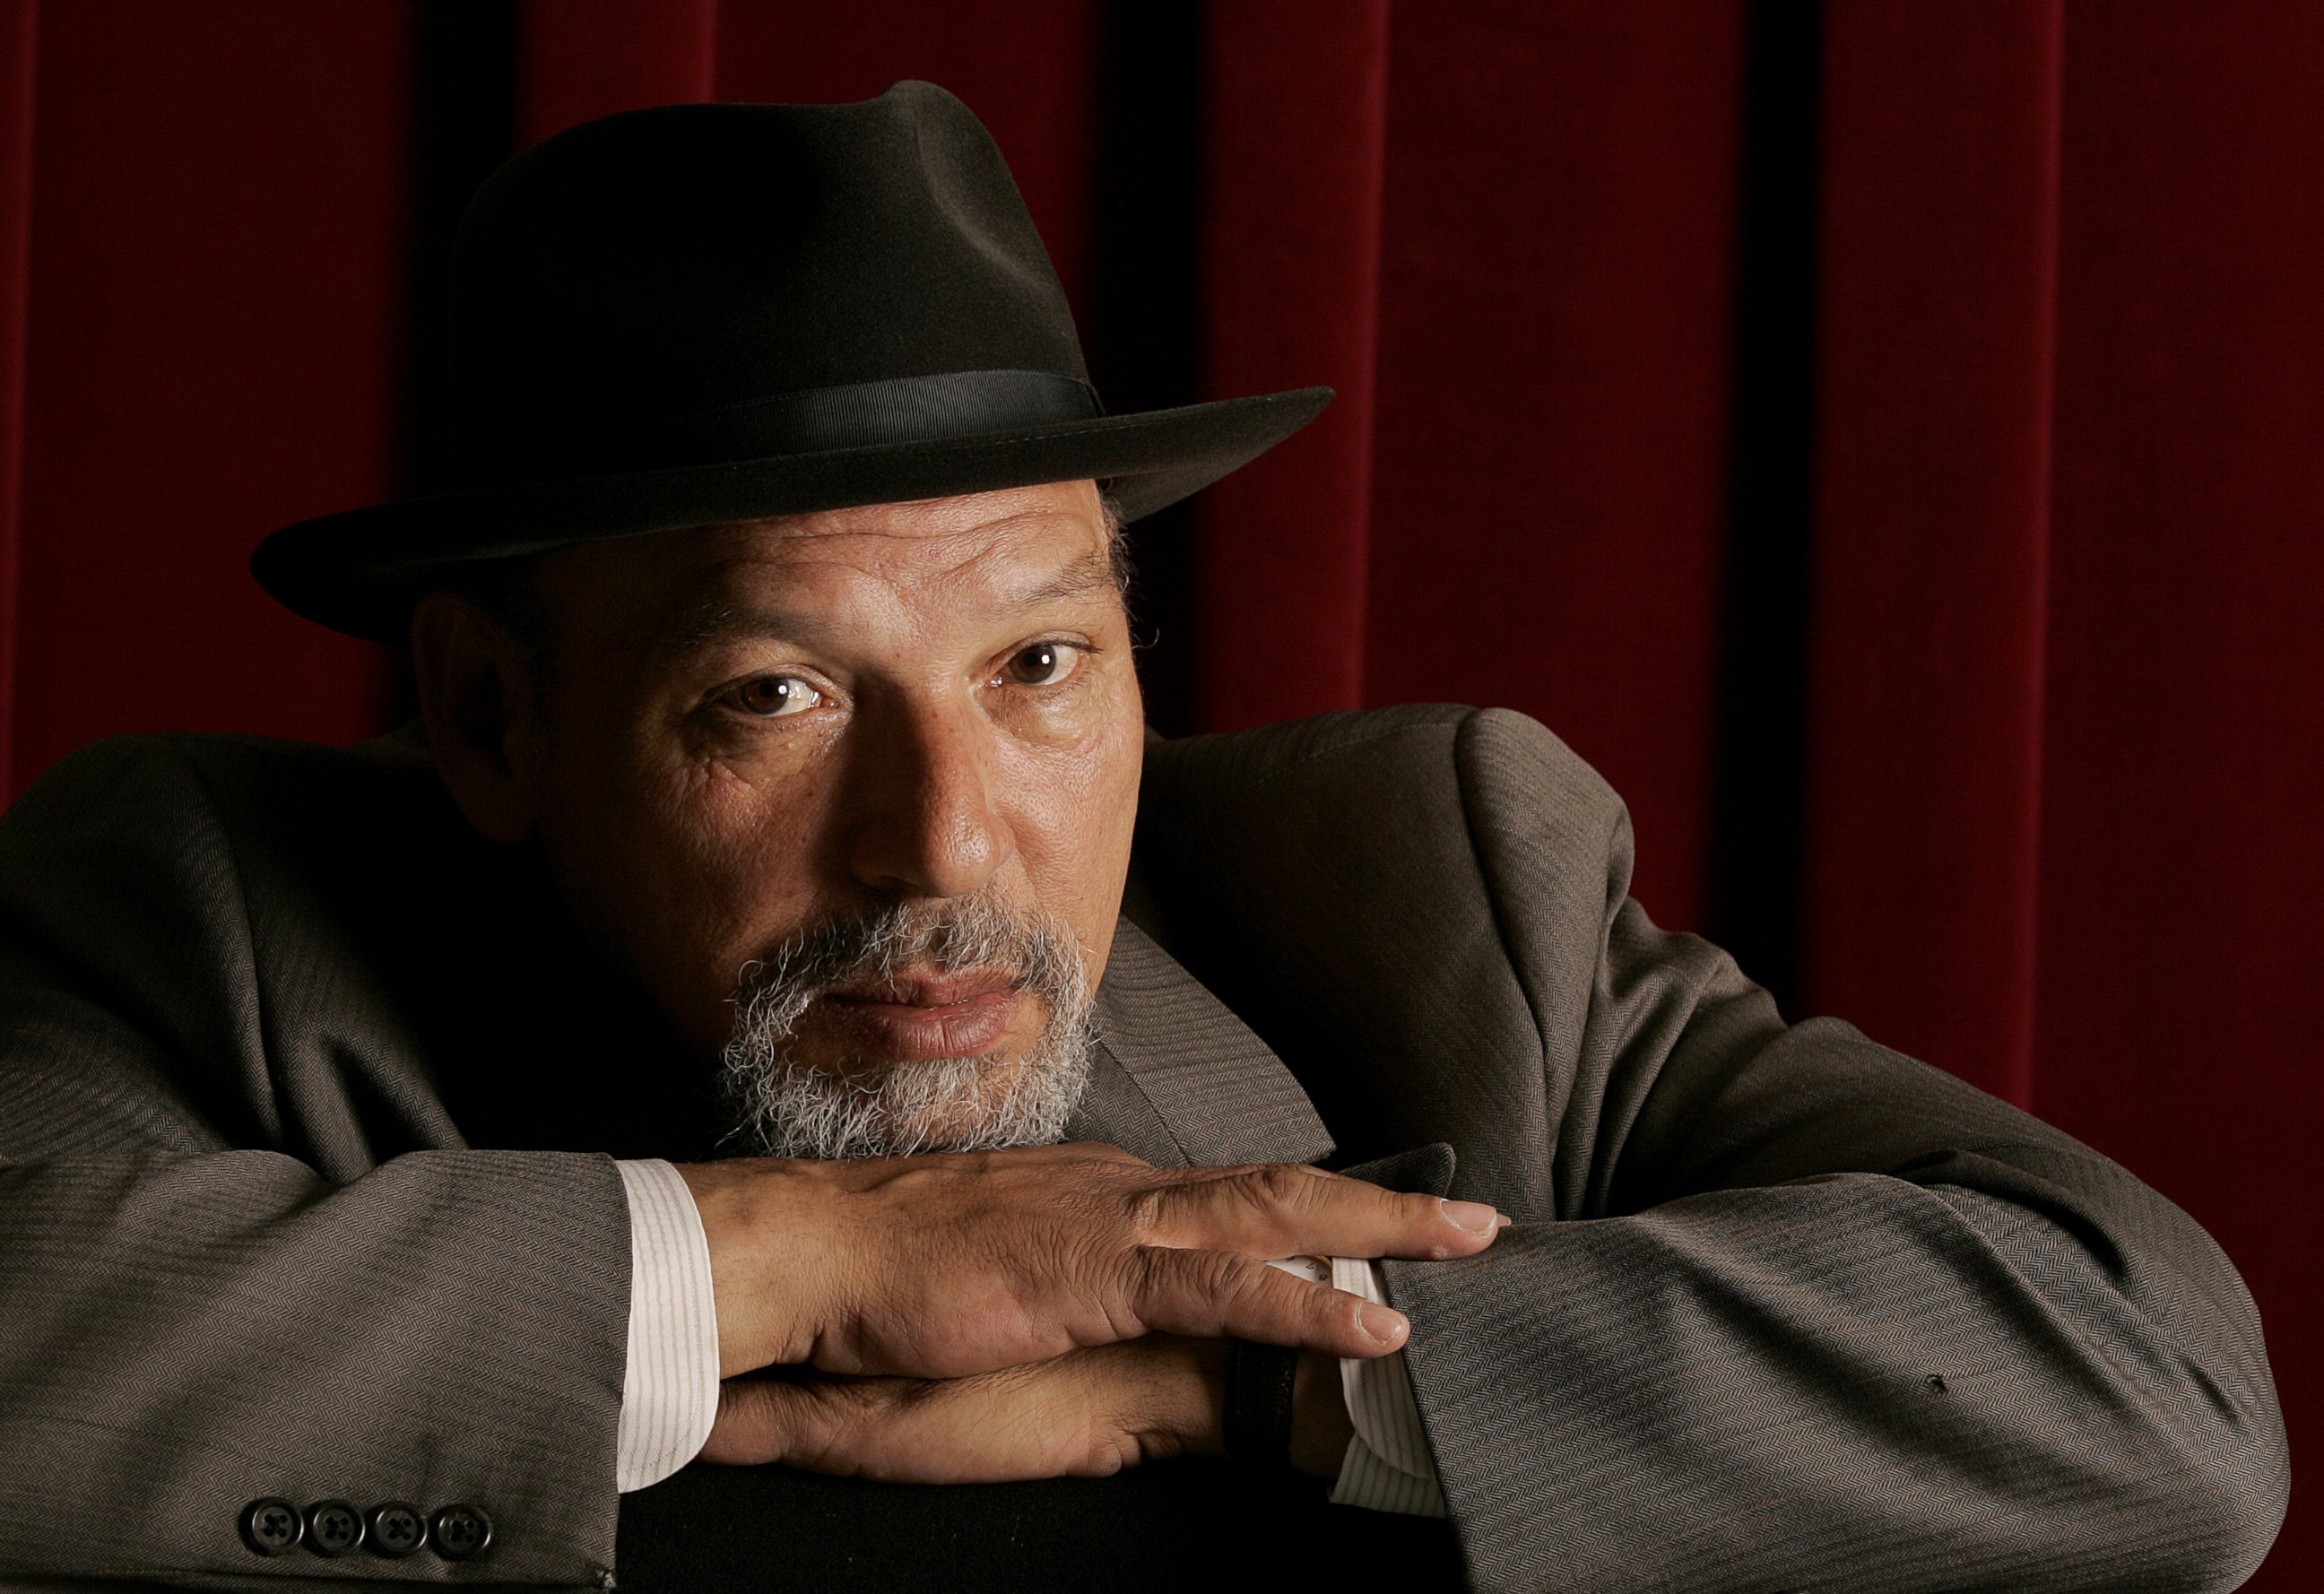 PHOTO: Pulitzer Prize winning playwright August Wilson, photographed in New Haven, Connecticut, March 16, 2005.